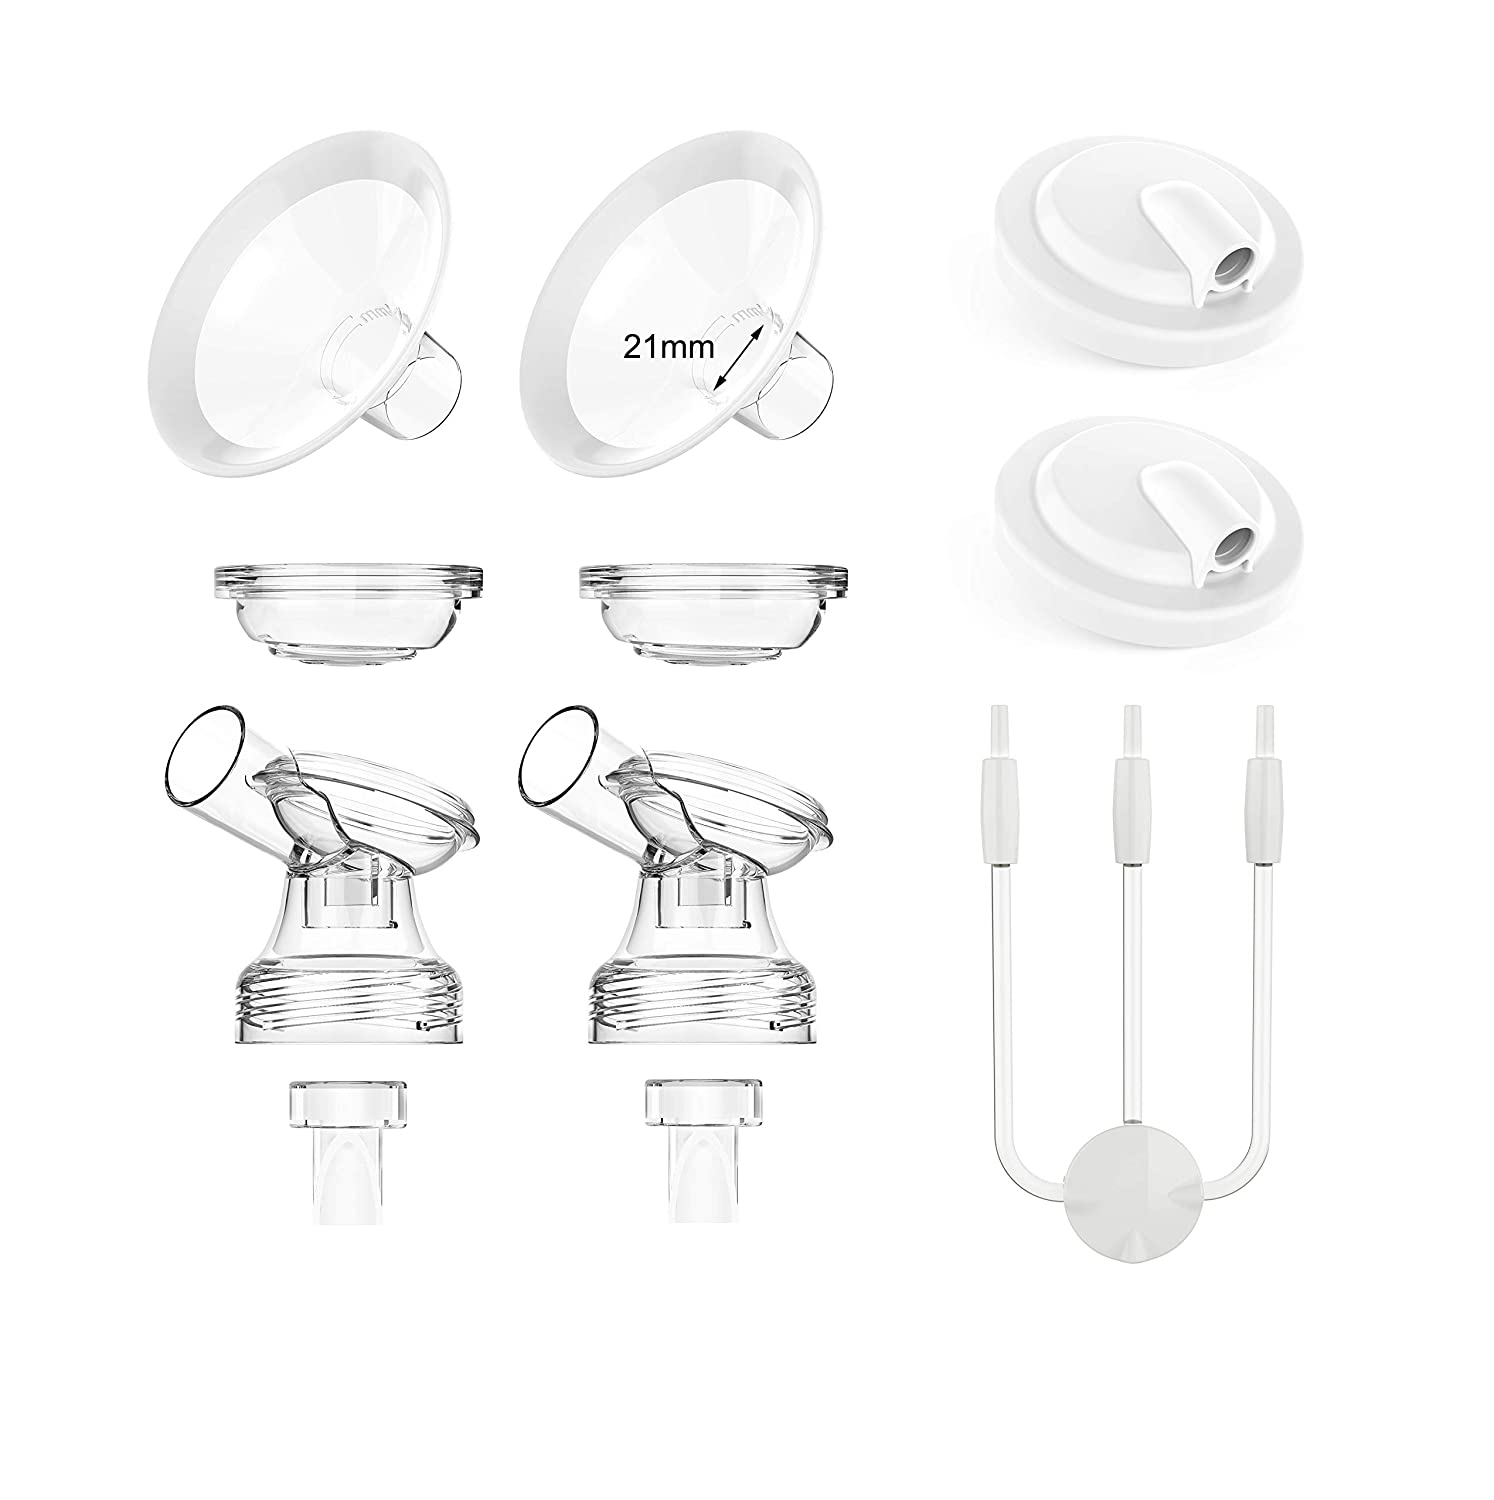 The 21mm parts for bellababy electric breast pump